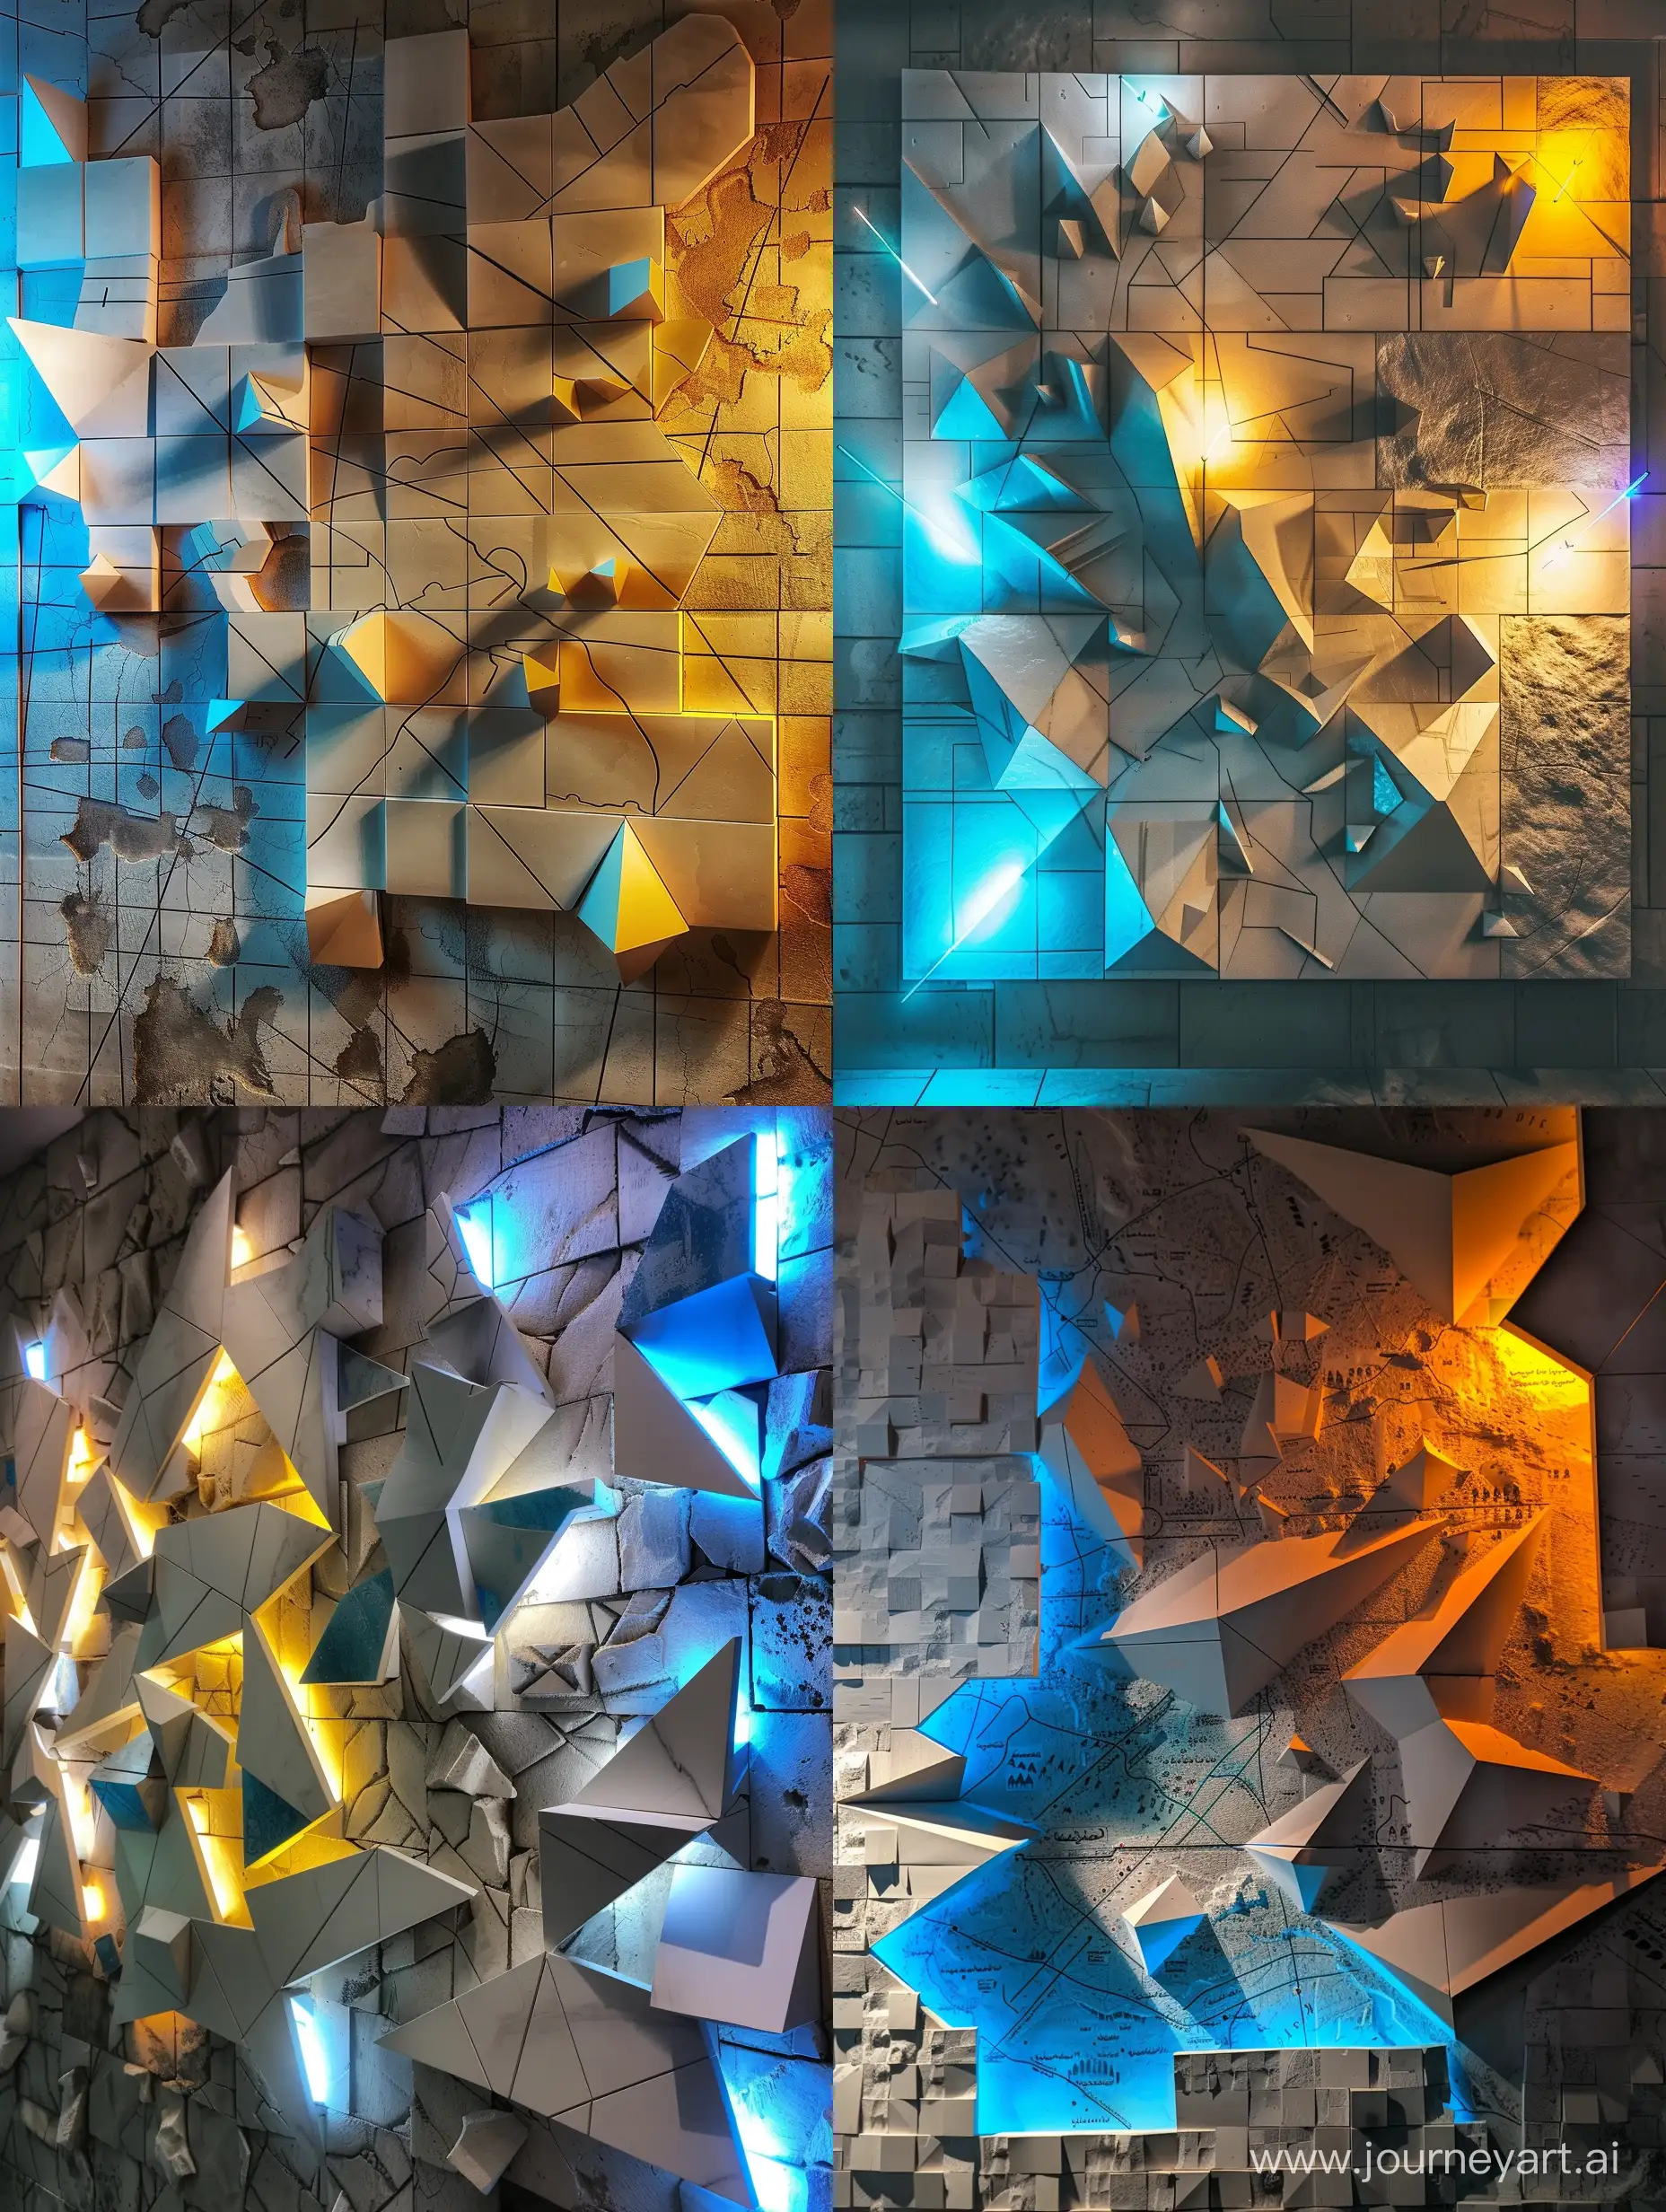 3d map of Iran on a wall with an unusual design made up of squares and triangles. The wall is lit up, creating a visually striking scene. some of the triangles are lightened with blue and yellow lights.